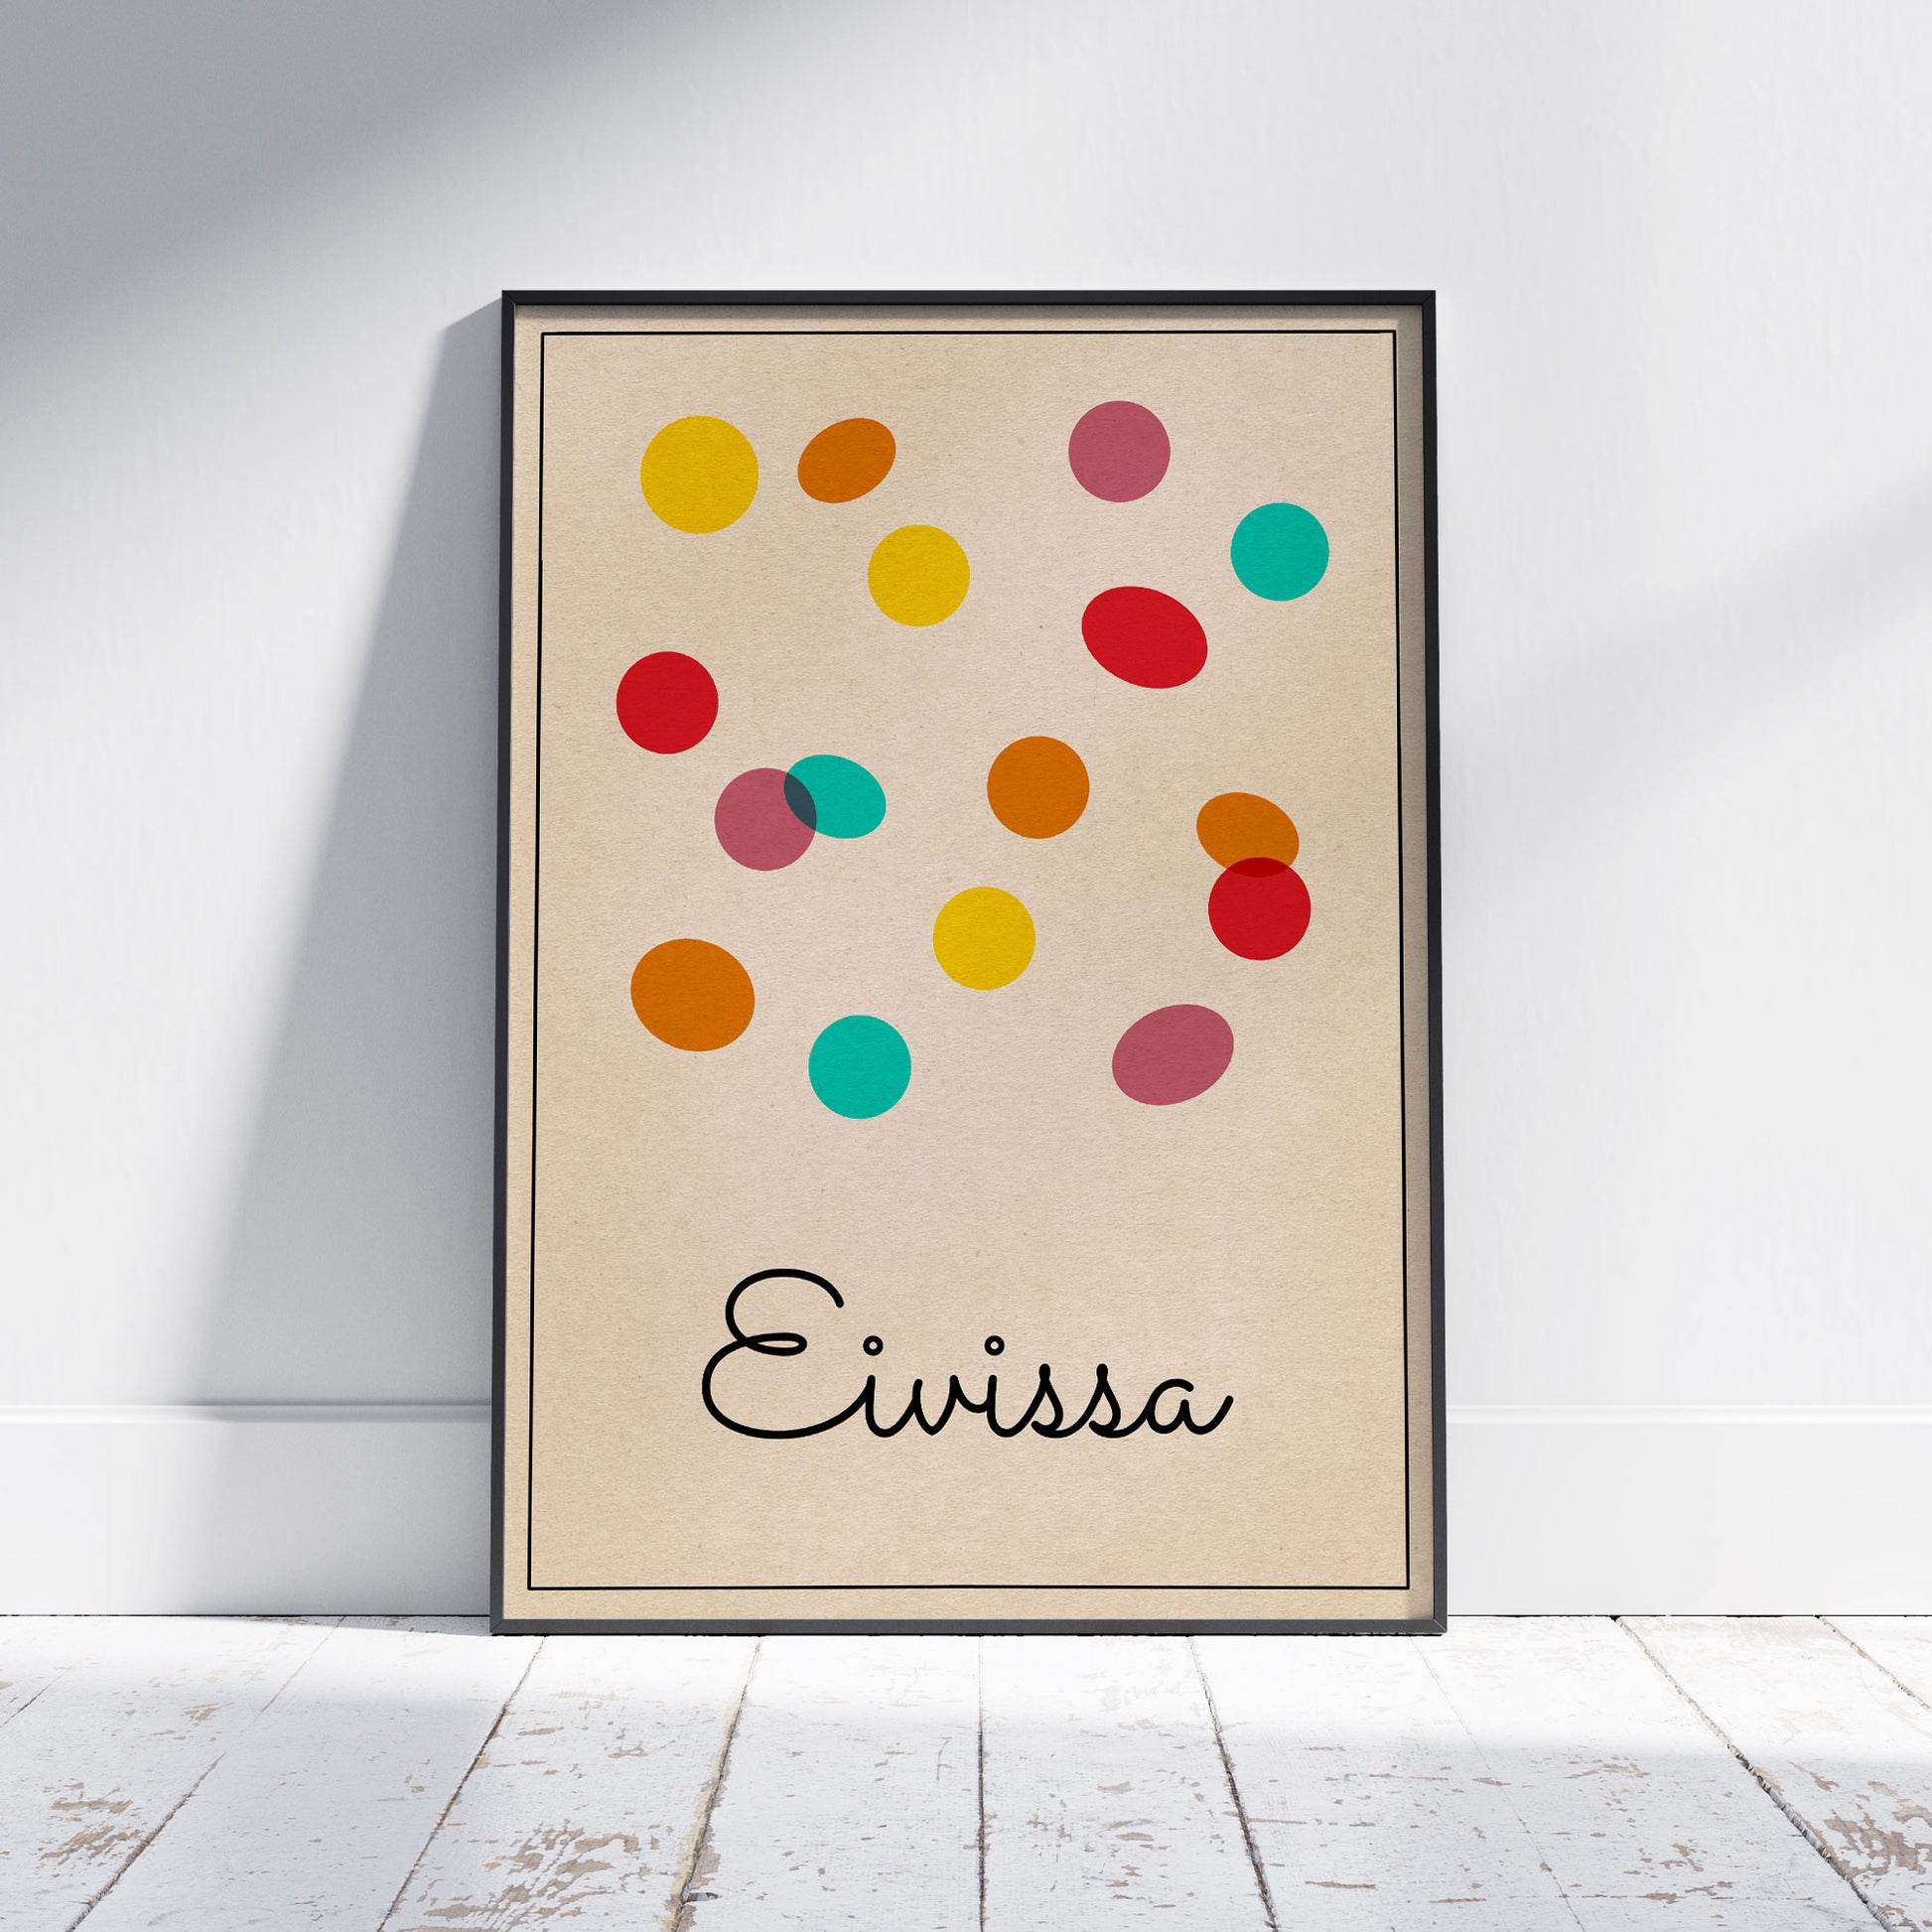 Eivissa Bubbles Poster by Cha™ - Ultra-minimalist island art print with vibrant color dots